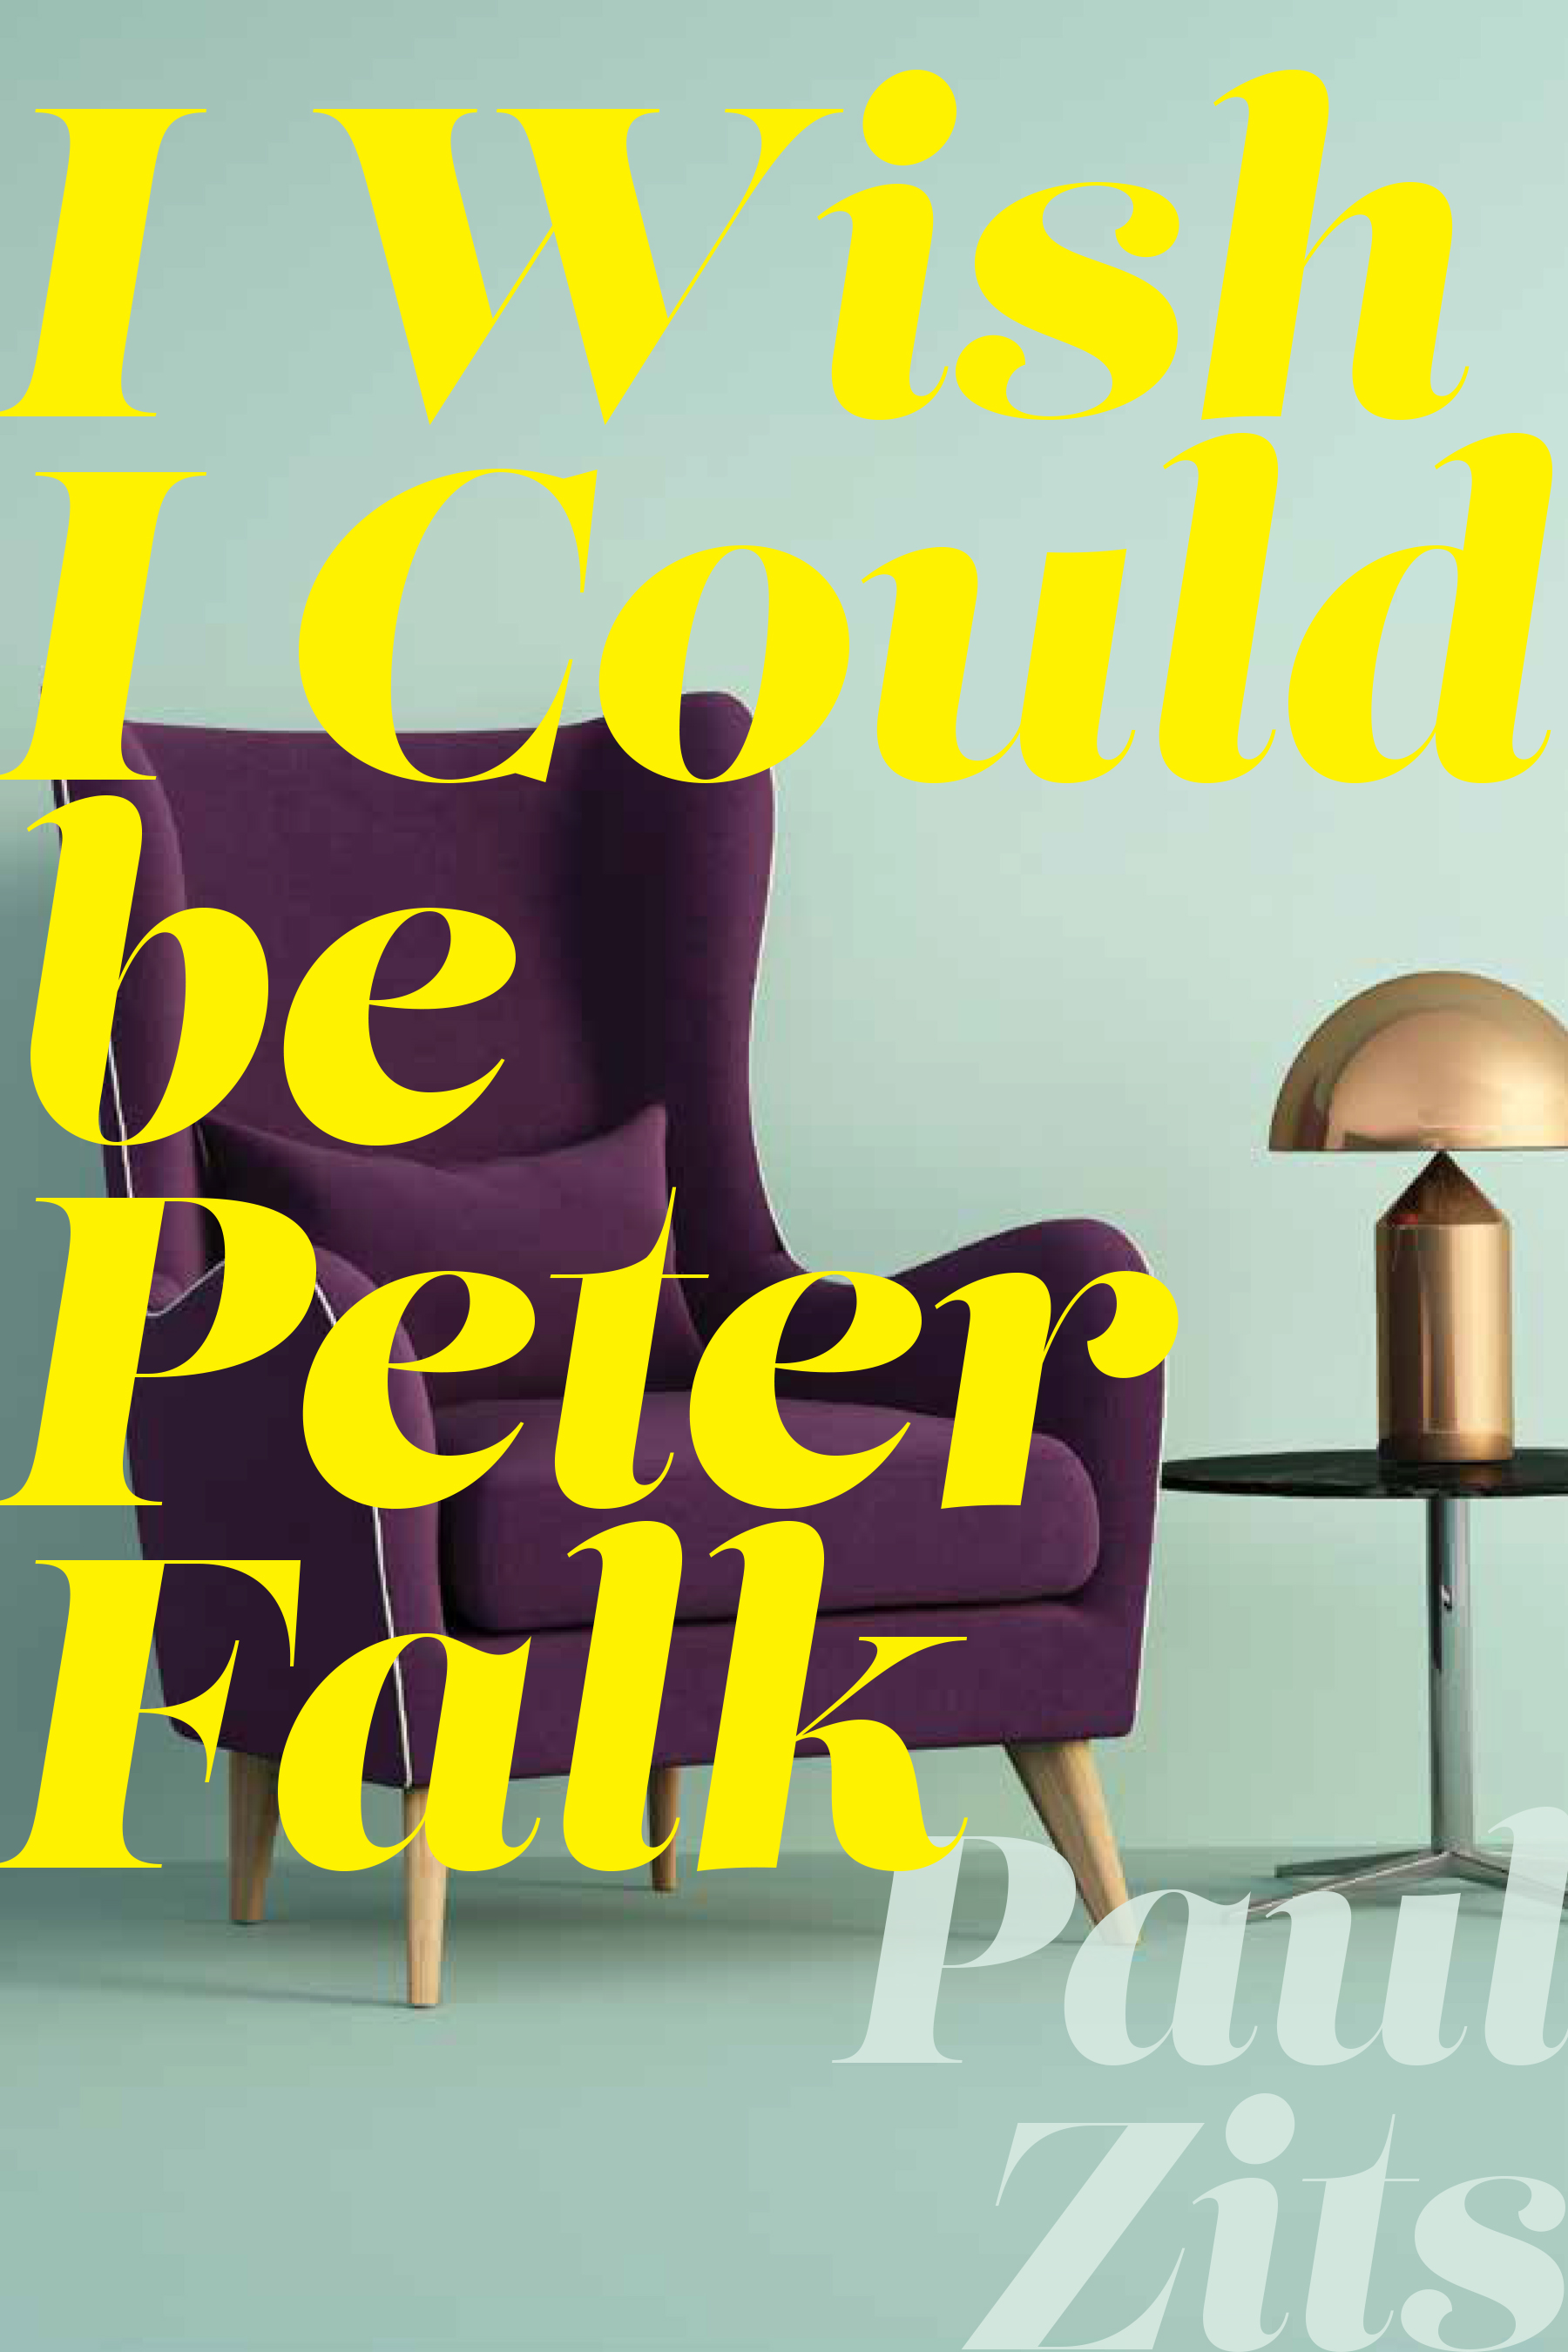 Cover Image for: I Wish I Could Be Peter Falk